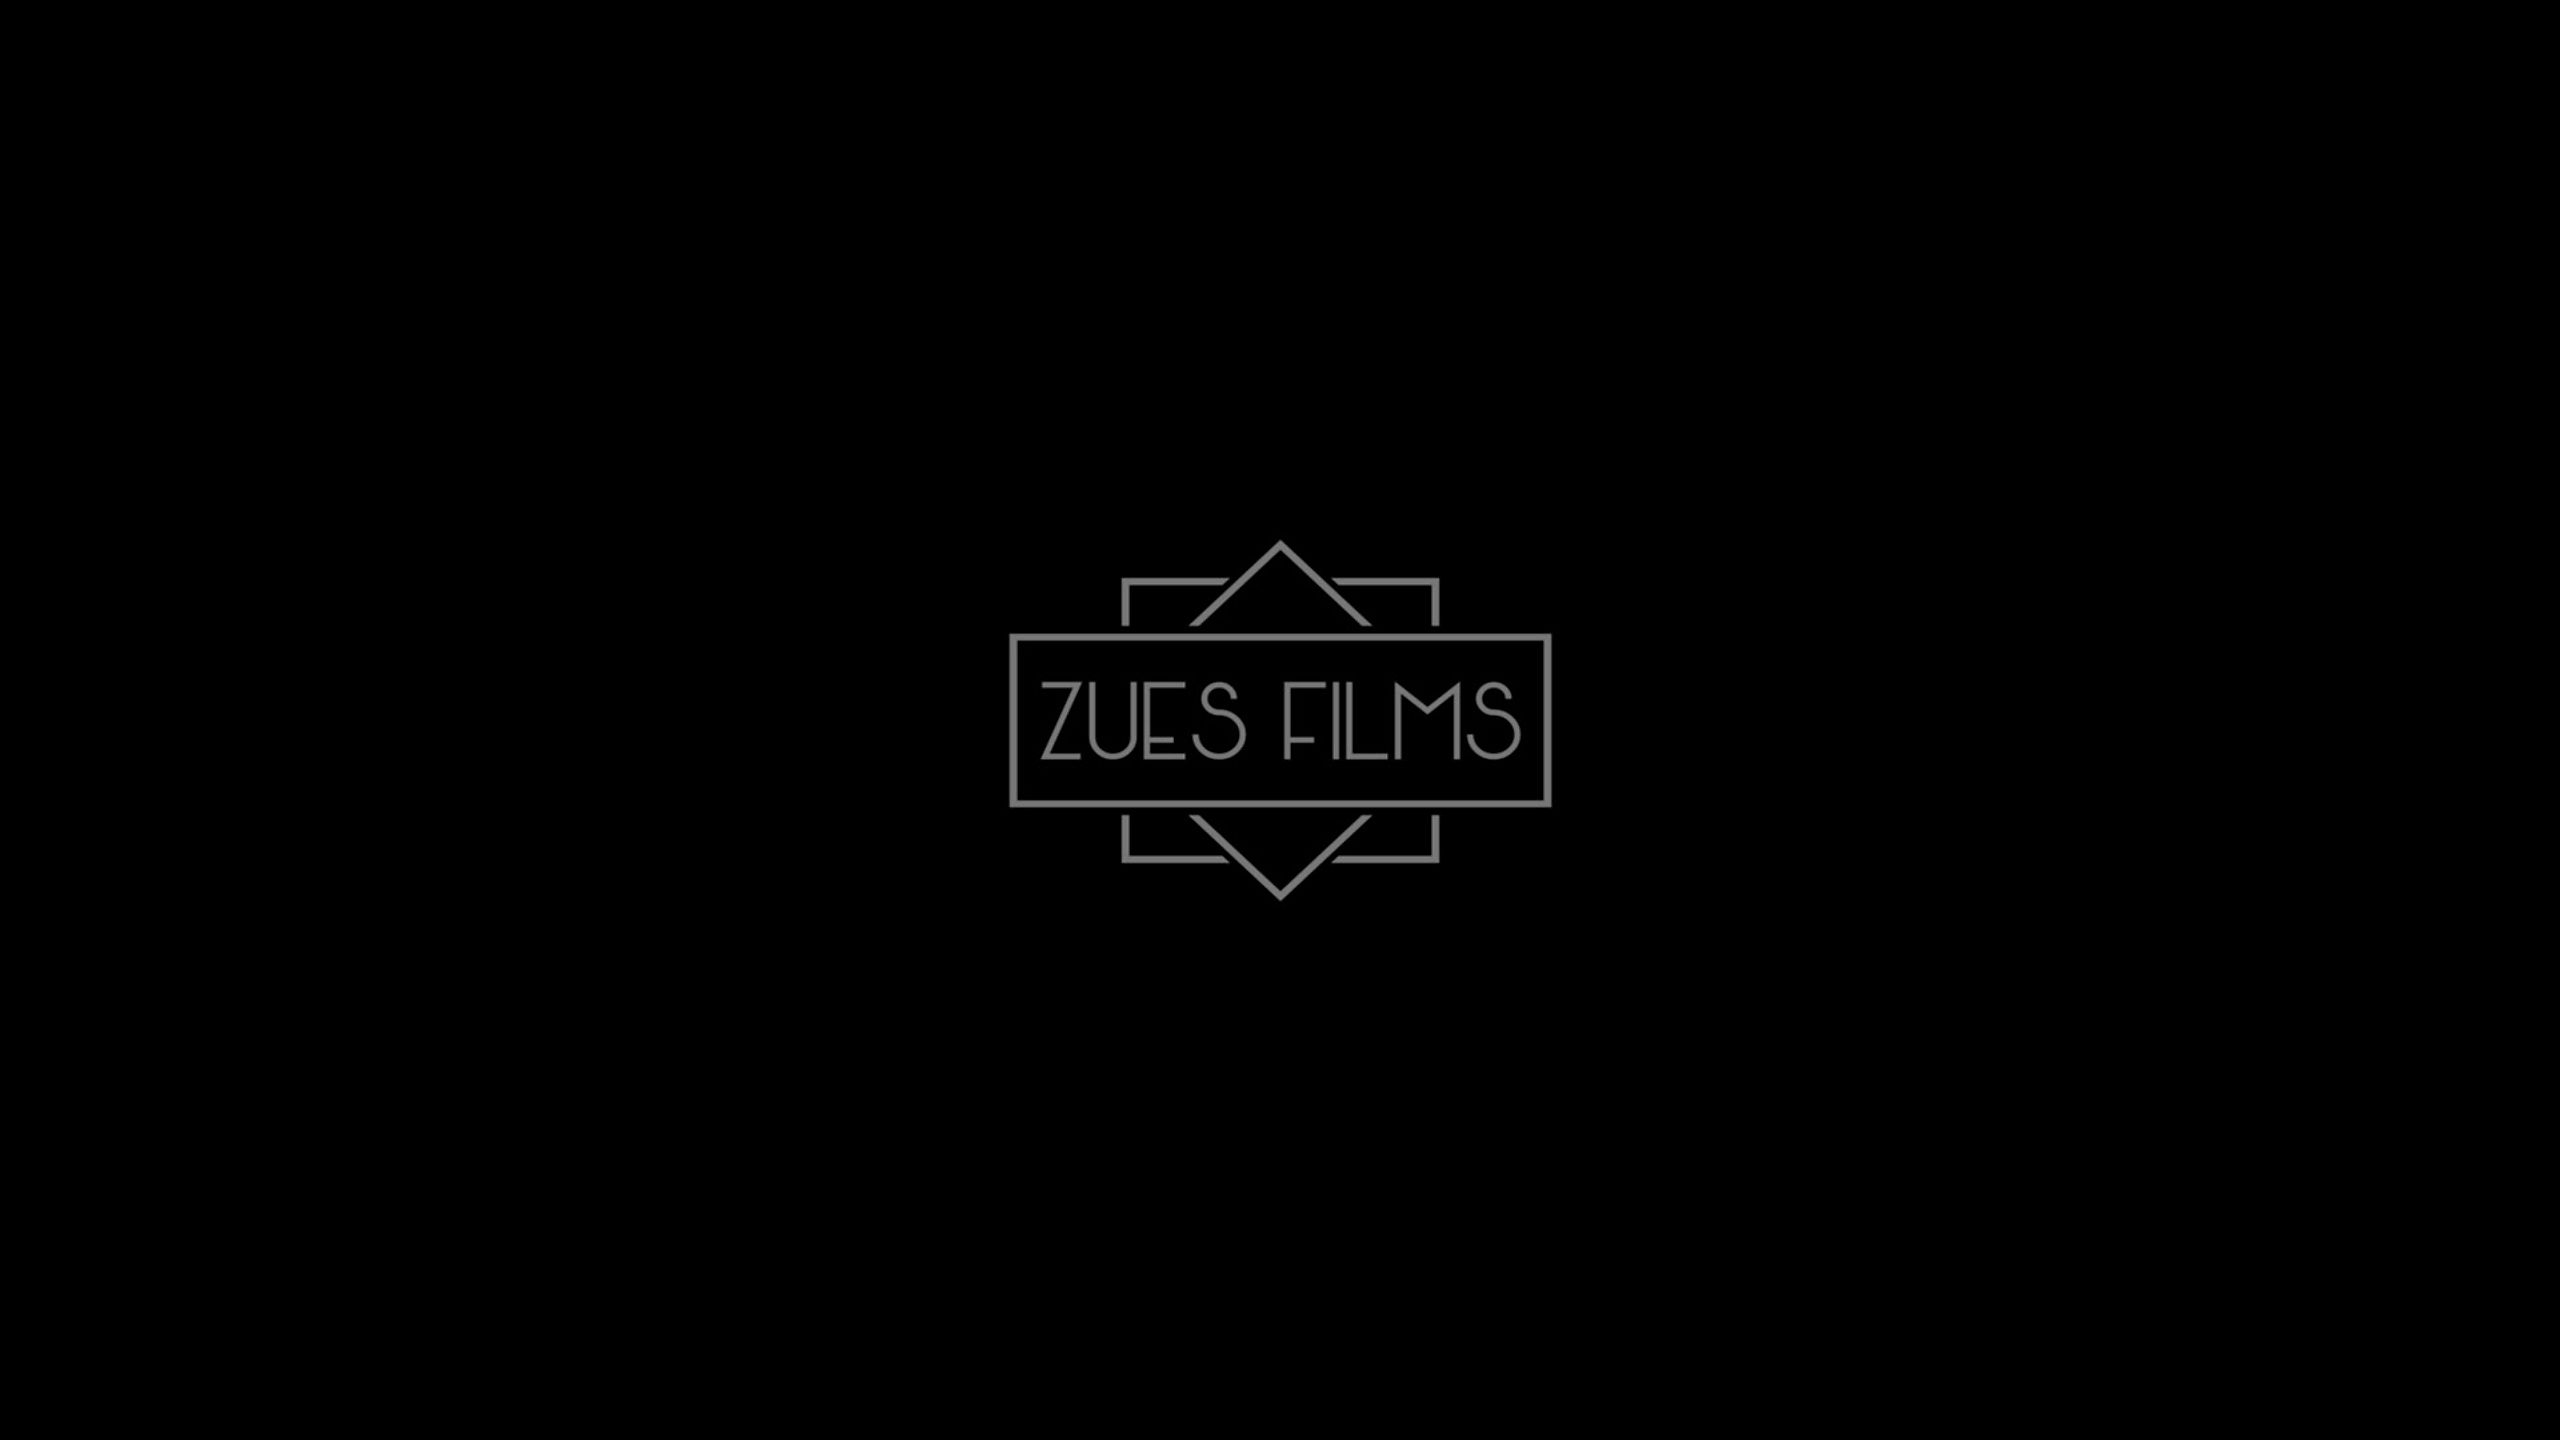 Zues Films